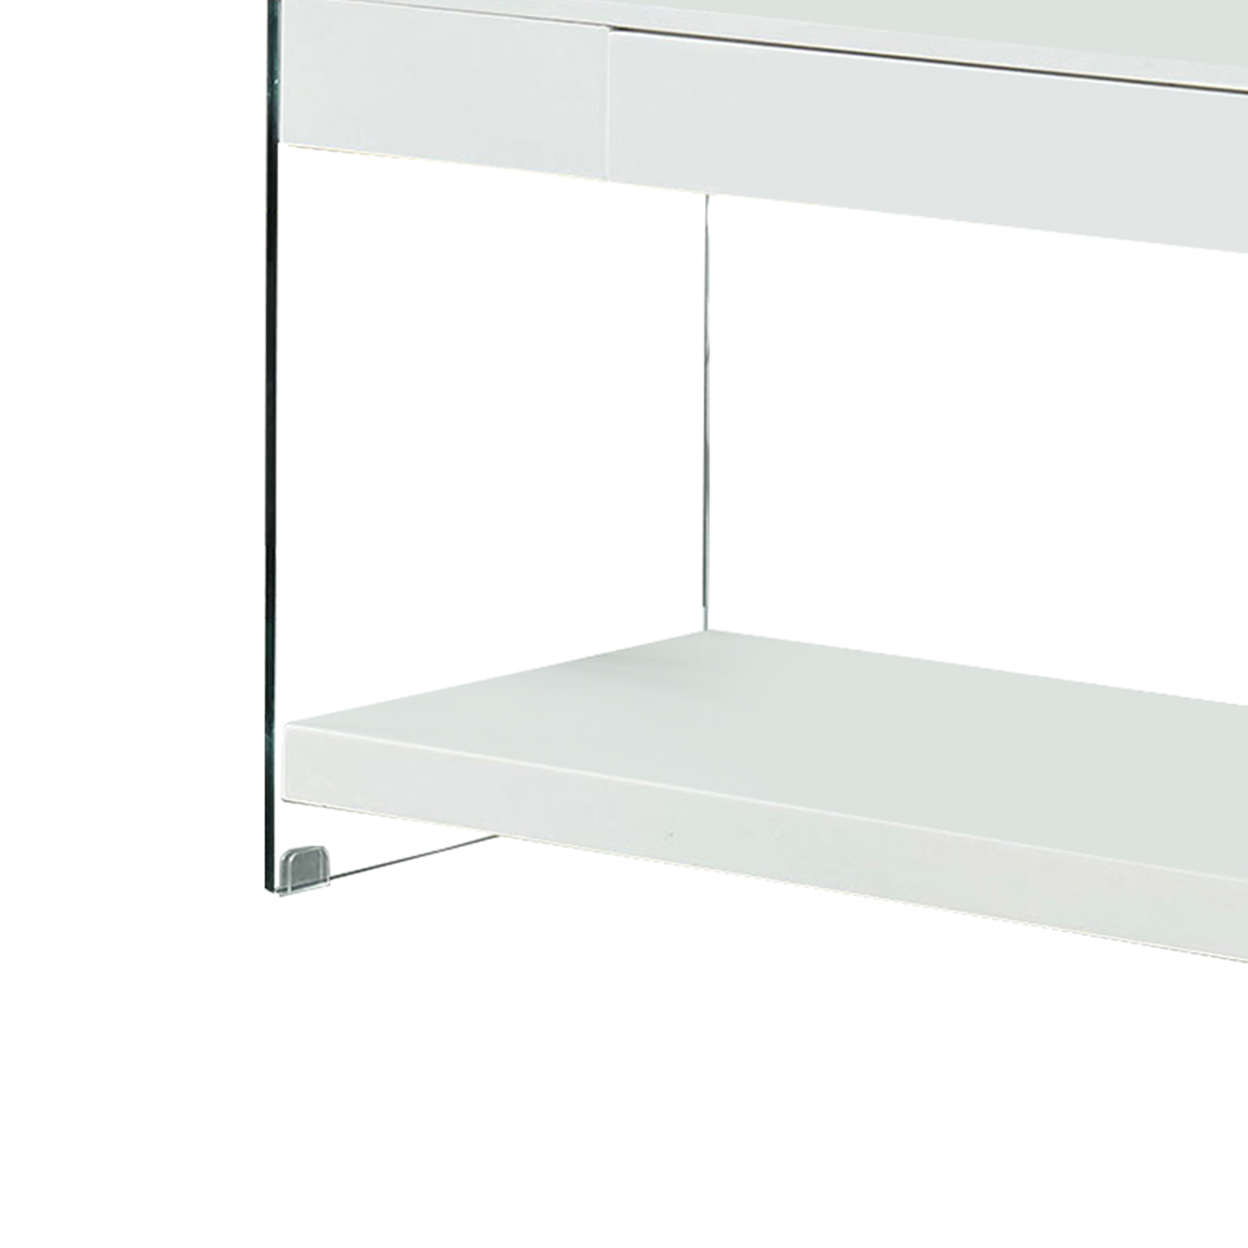 Contemporary Style Plastic TV Stand With Glass Side Panels, White- Saltoro Sherpi